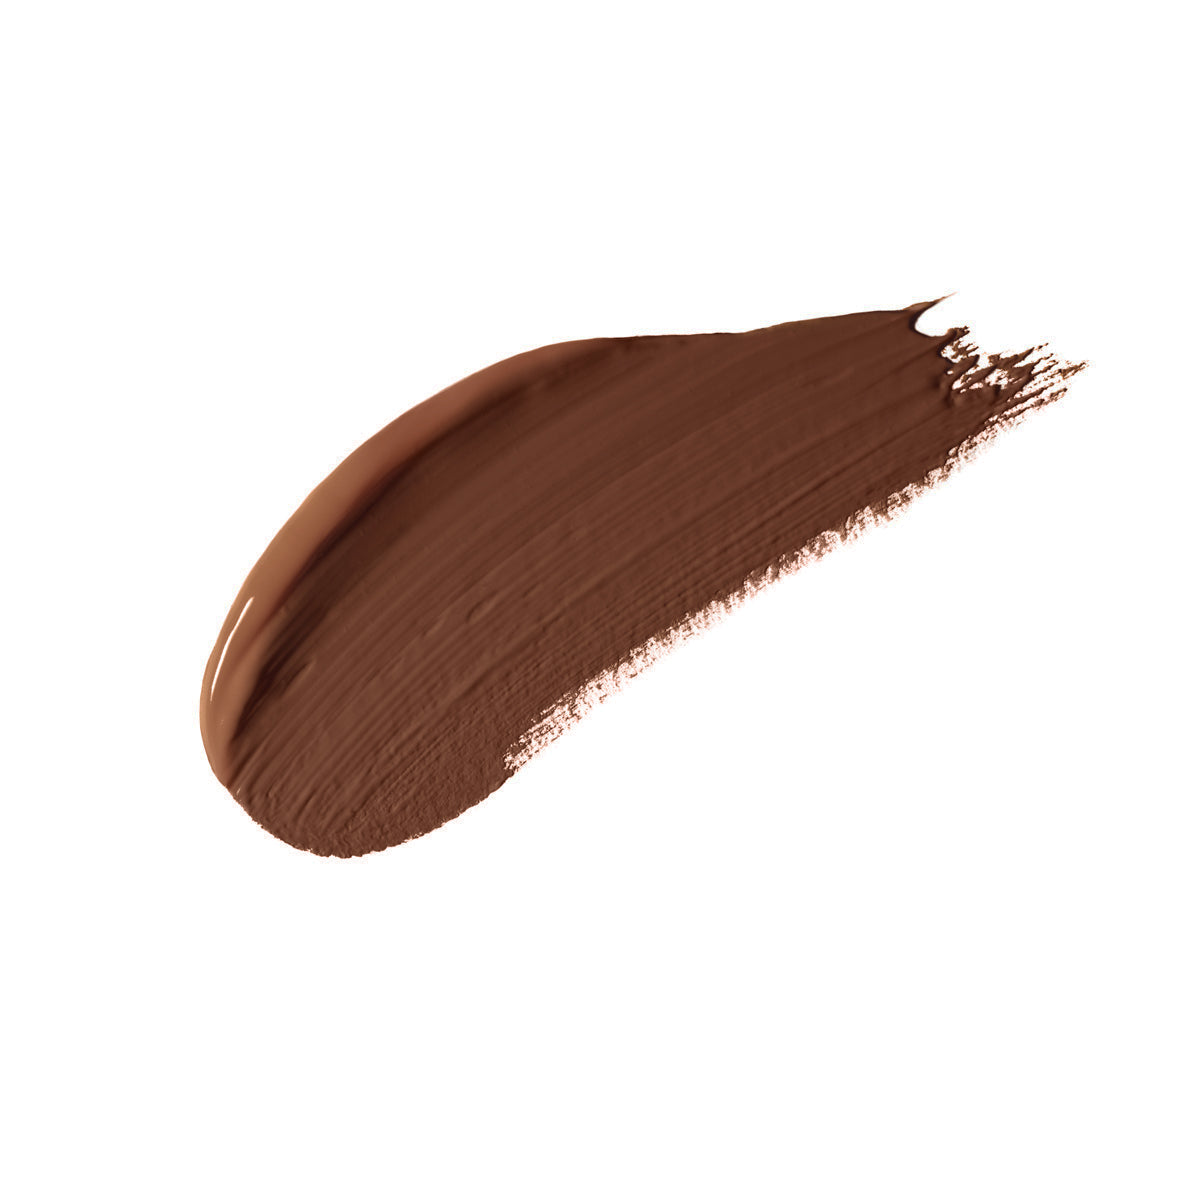 17 - RICH BROWN / YELLOW - medium to full coverage foundation in rich brown yellow undertone shade seventeen